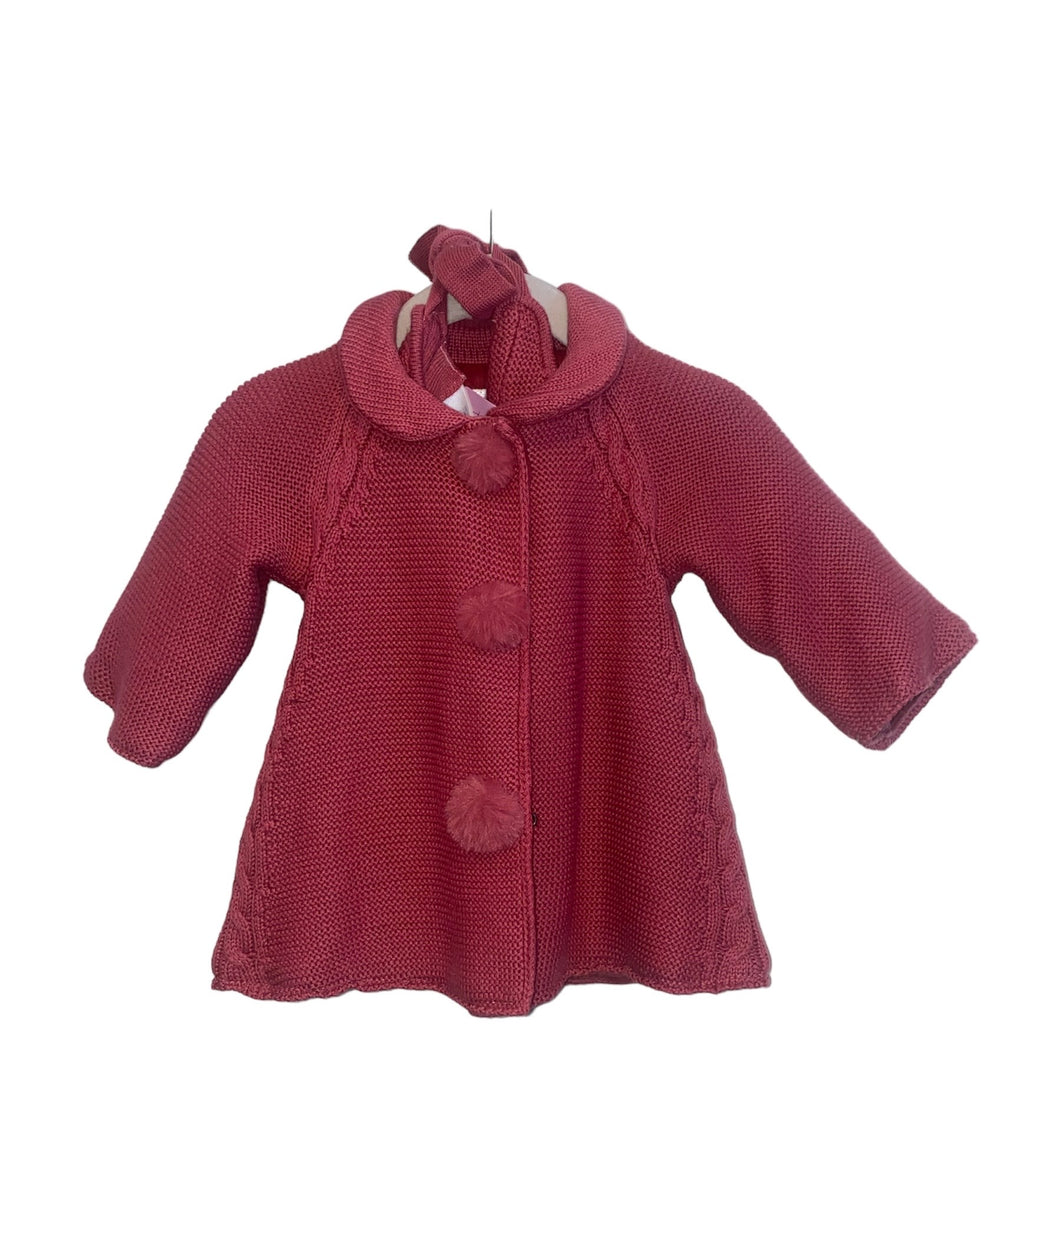 Mayoral 0-3m jacket with hat